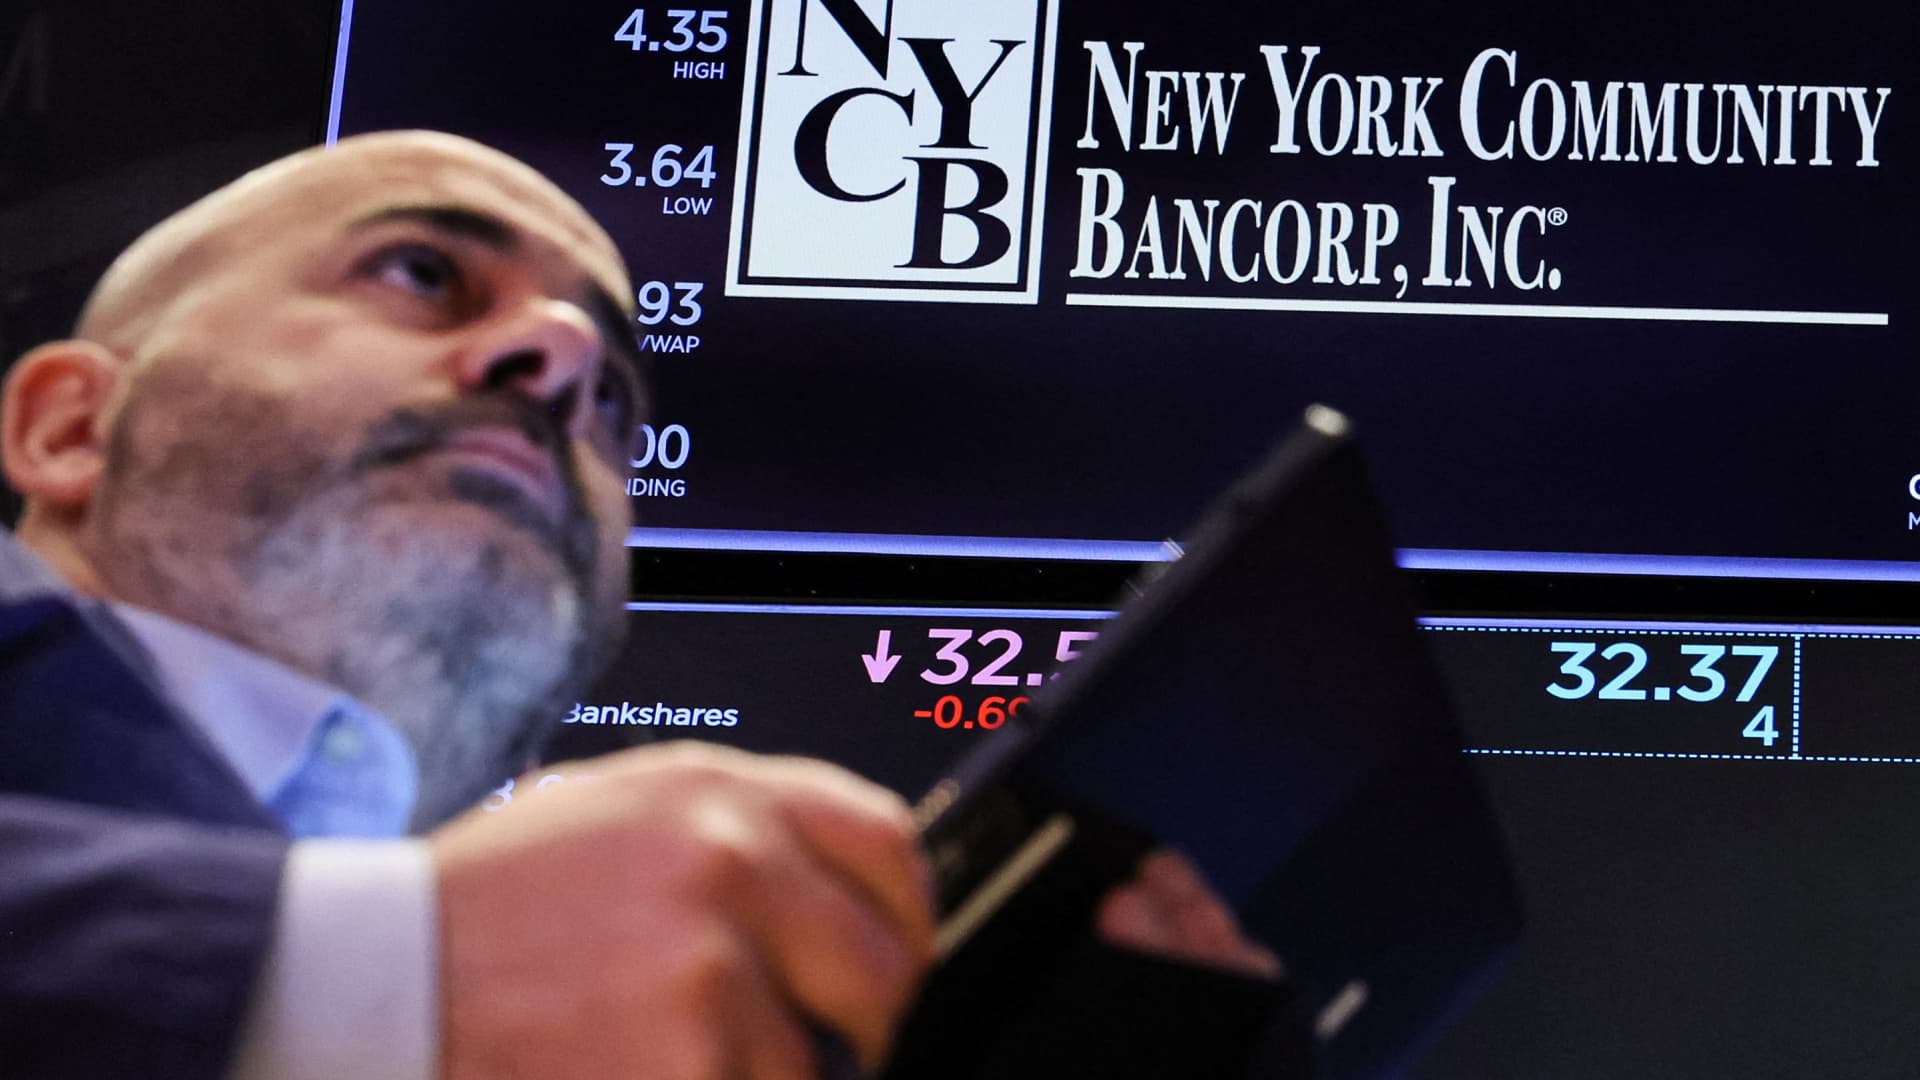 Wall Street concerns grow over NYCB’s loan losses and deposit levels as stock plunges below 